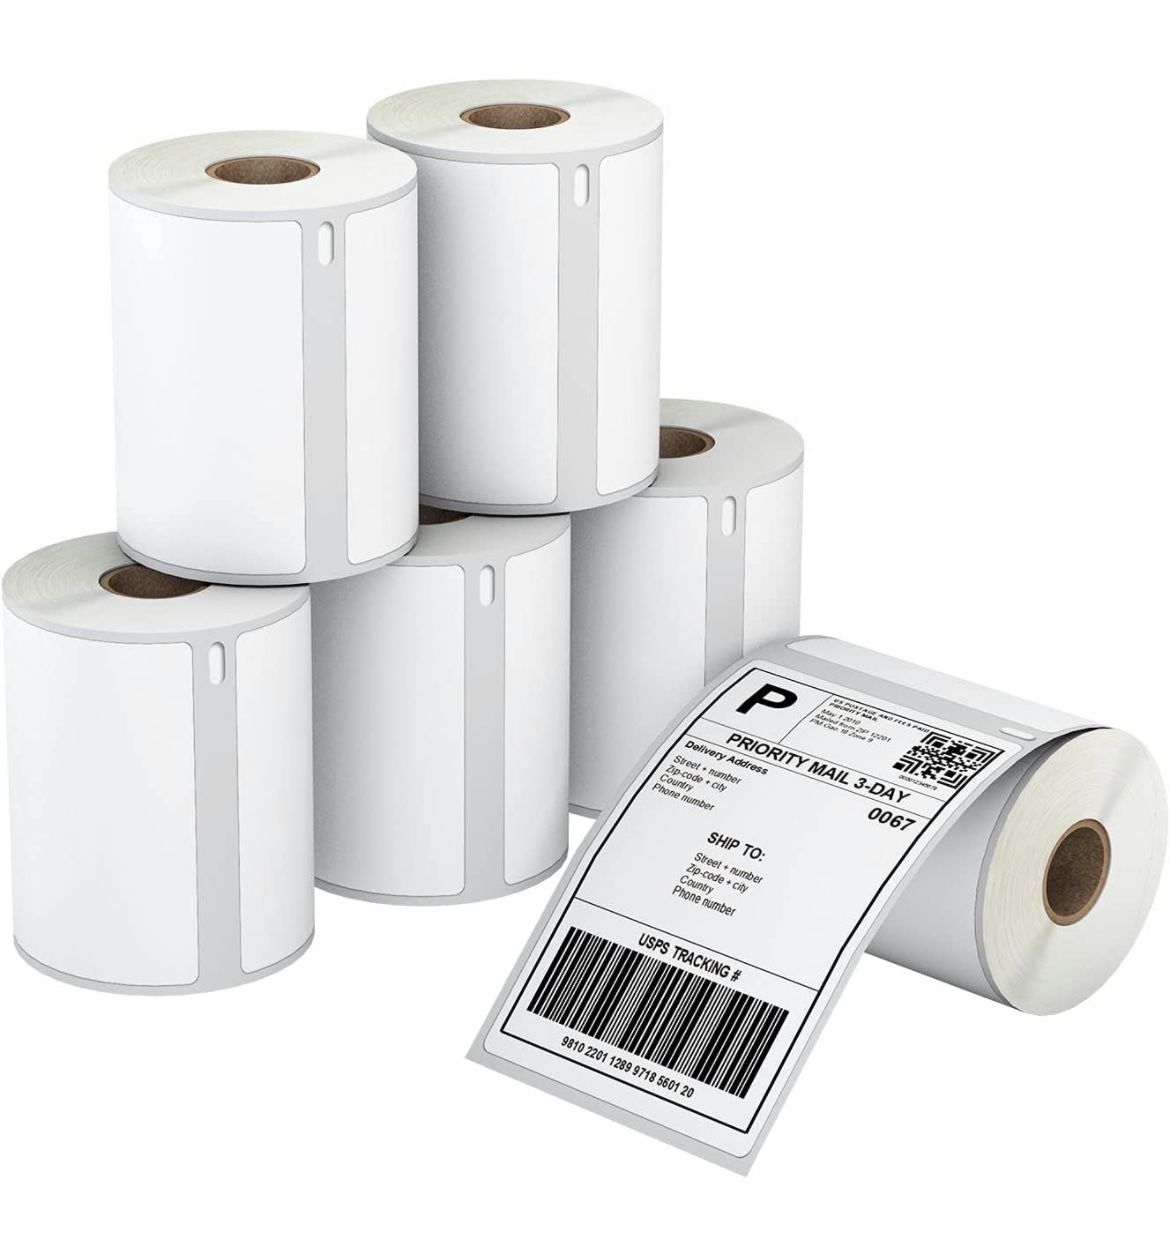 Compatible 4" x 6" Direct Thermal Label Replacement for DYMO 1744907 Postage Address Shipping Compatible with Dymo 4XL, Rollo & Zebra Printer Permanen